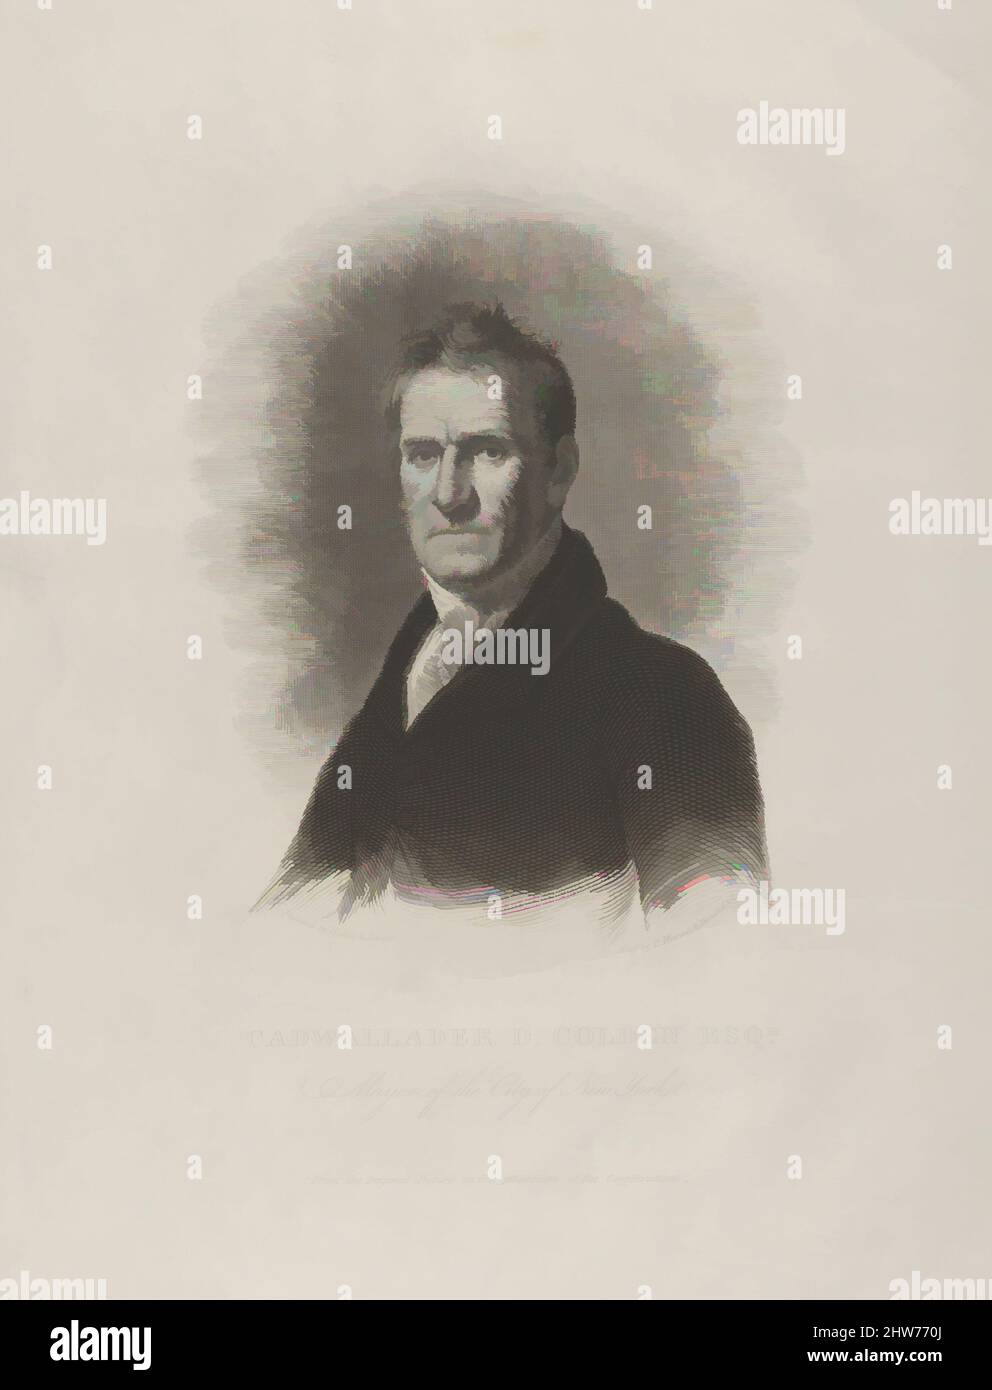 Art inspired by Cadwallader David Colden, Mayor of New York City, ca. 1825, Engraving; first state of two, Plate: 12 5/8 x 9 3/4 in. (32 x 24.7 cm), Prints, Asher Brown Durand (American, Jefferson, New Jersey 1796–1886 Maplewood, New Jersey), Peter Maverick (American, New York 1780–, Classic works modernized by Artotop with a splash of modernity. Shapes, color and value, eye-catching visual impact on art. Emotions through freedom of artworks in a contemporary way. A timeless message pursuing a wildly creative new direction. Artists turning to the digital medium and creating the Artotop NFT Stock Photo